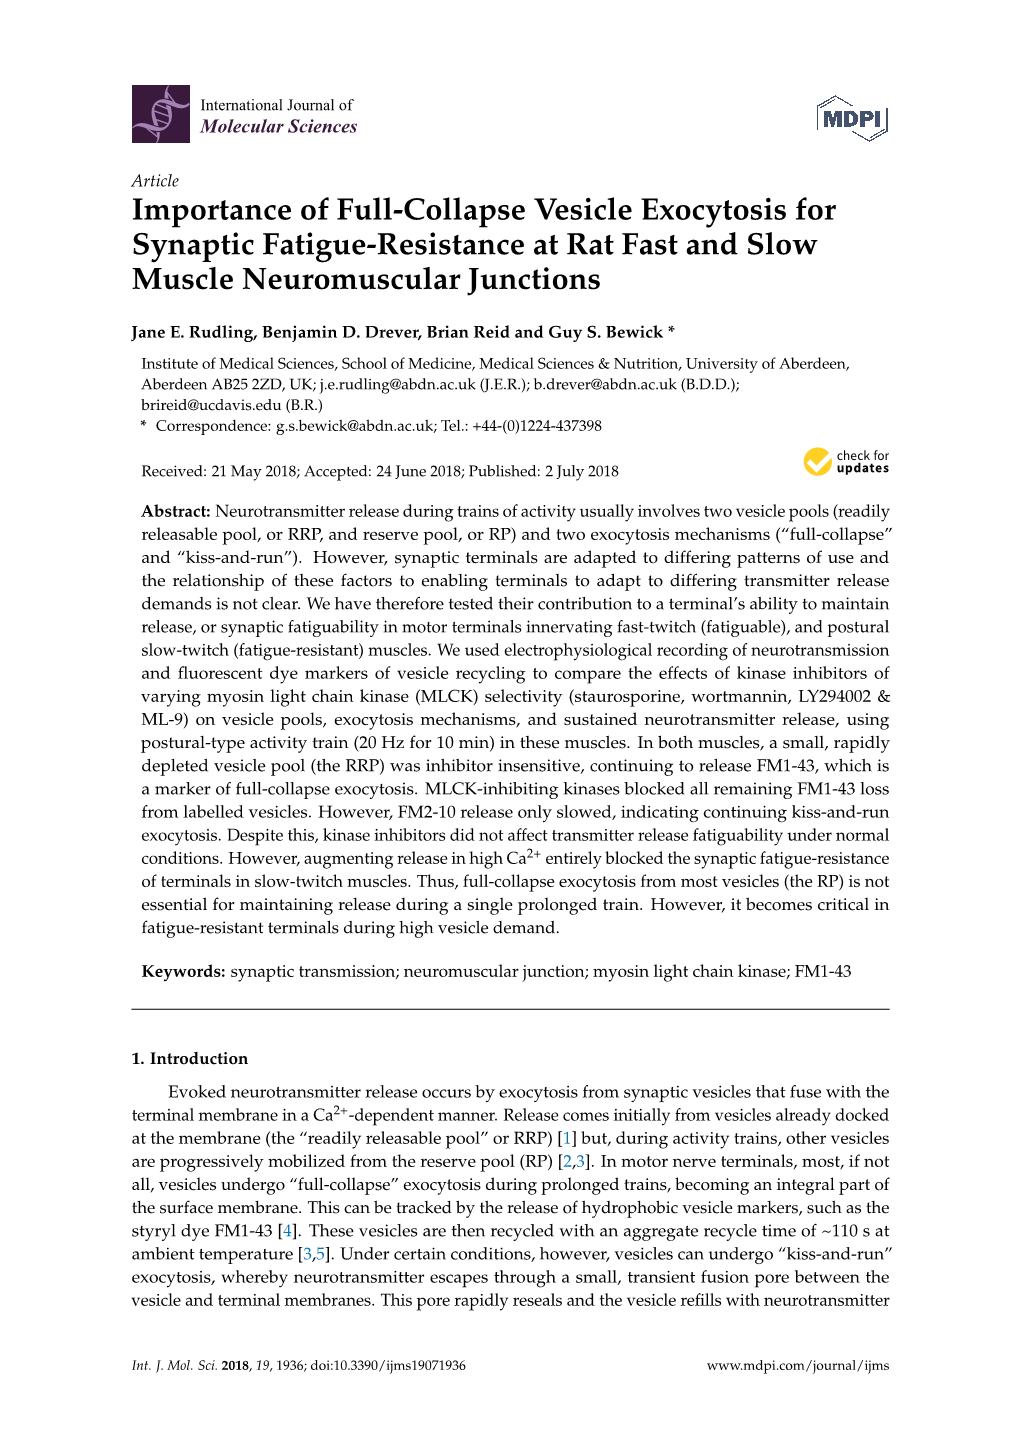 Importance of Full-Collapse Vesicle Exocytosis for Synaptic Fatigue-Resistance at Rat Fast and Slow Muscle Neuromuscular Junctions